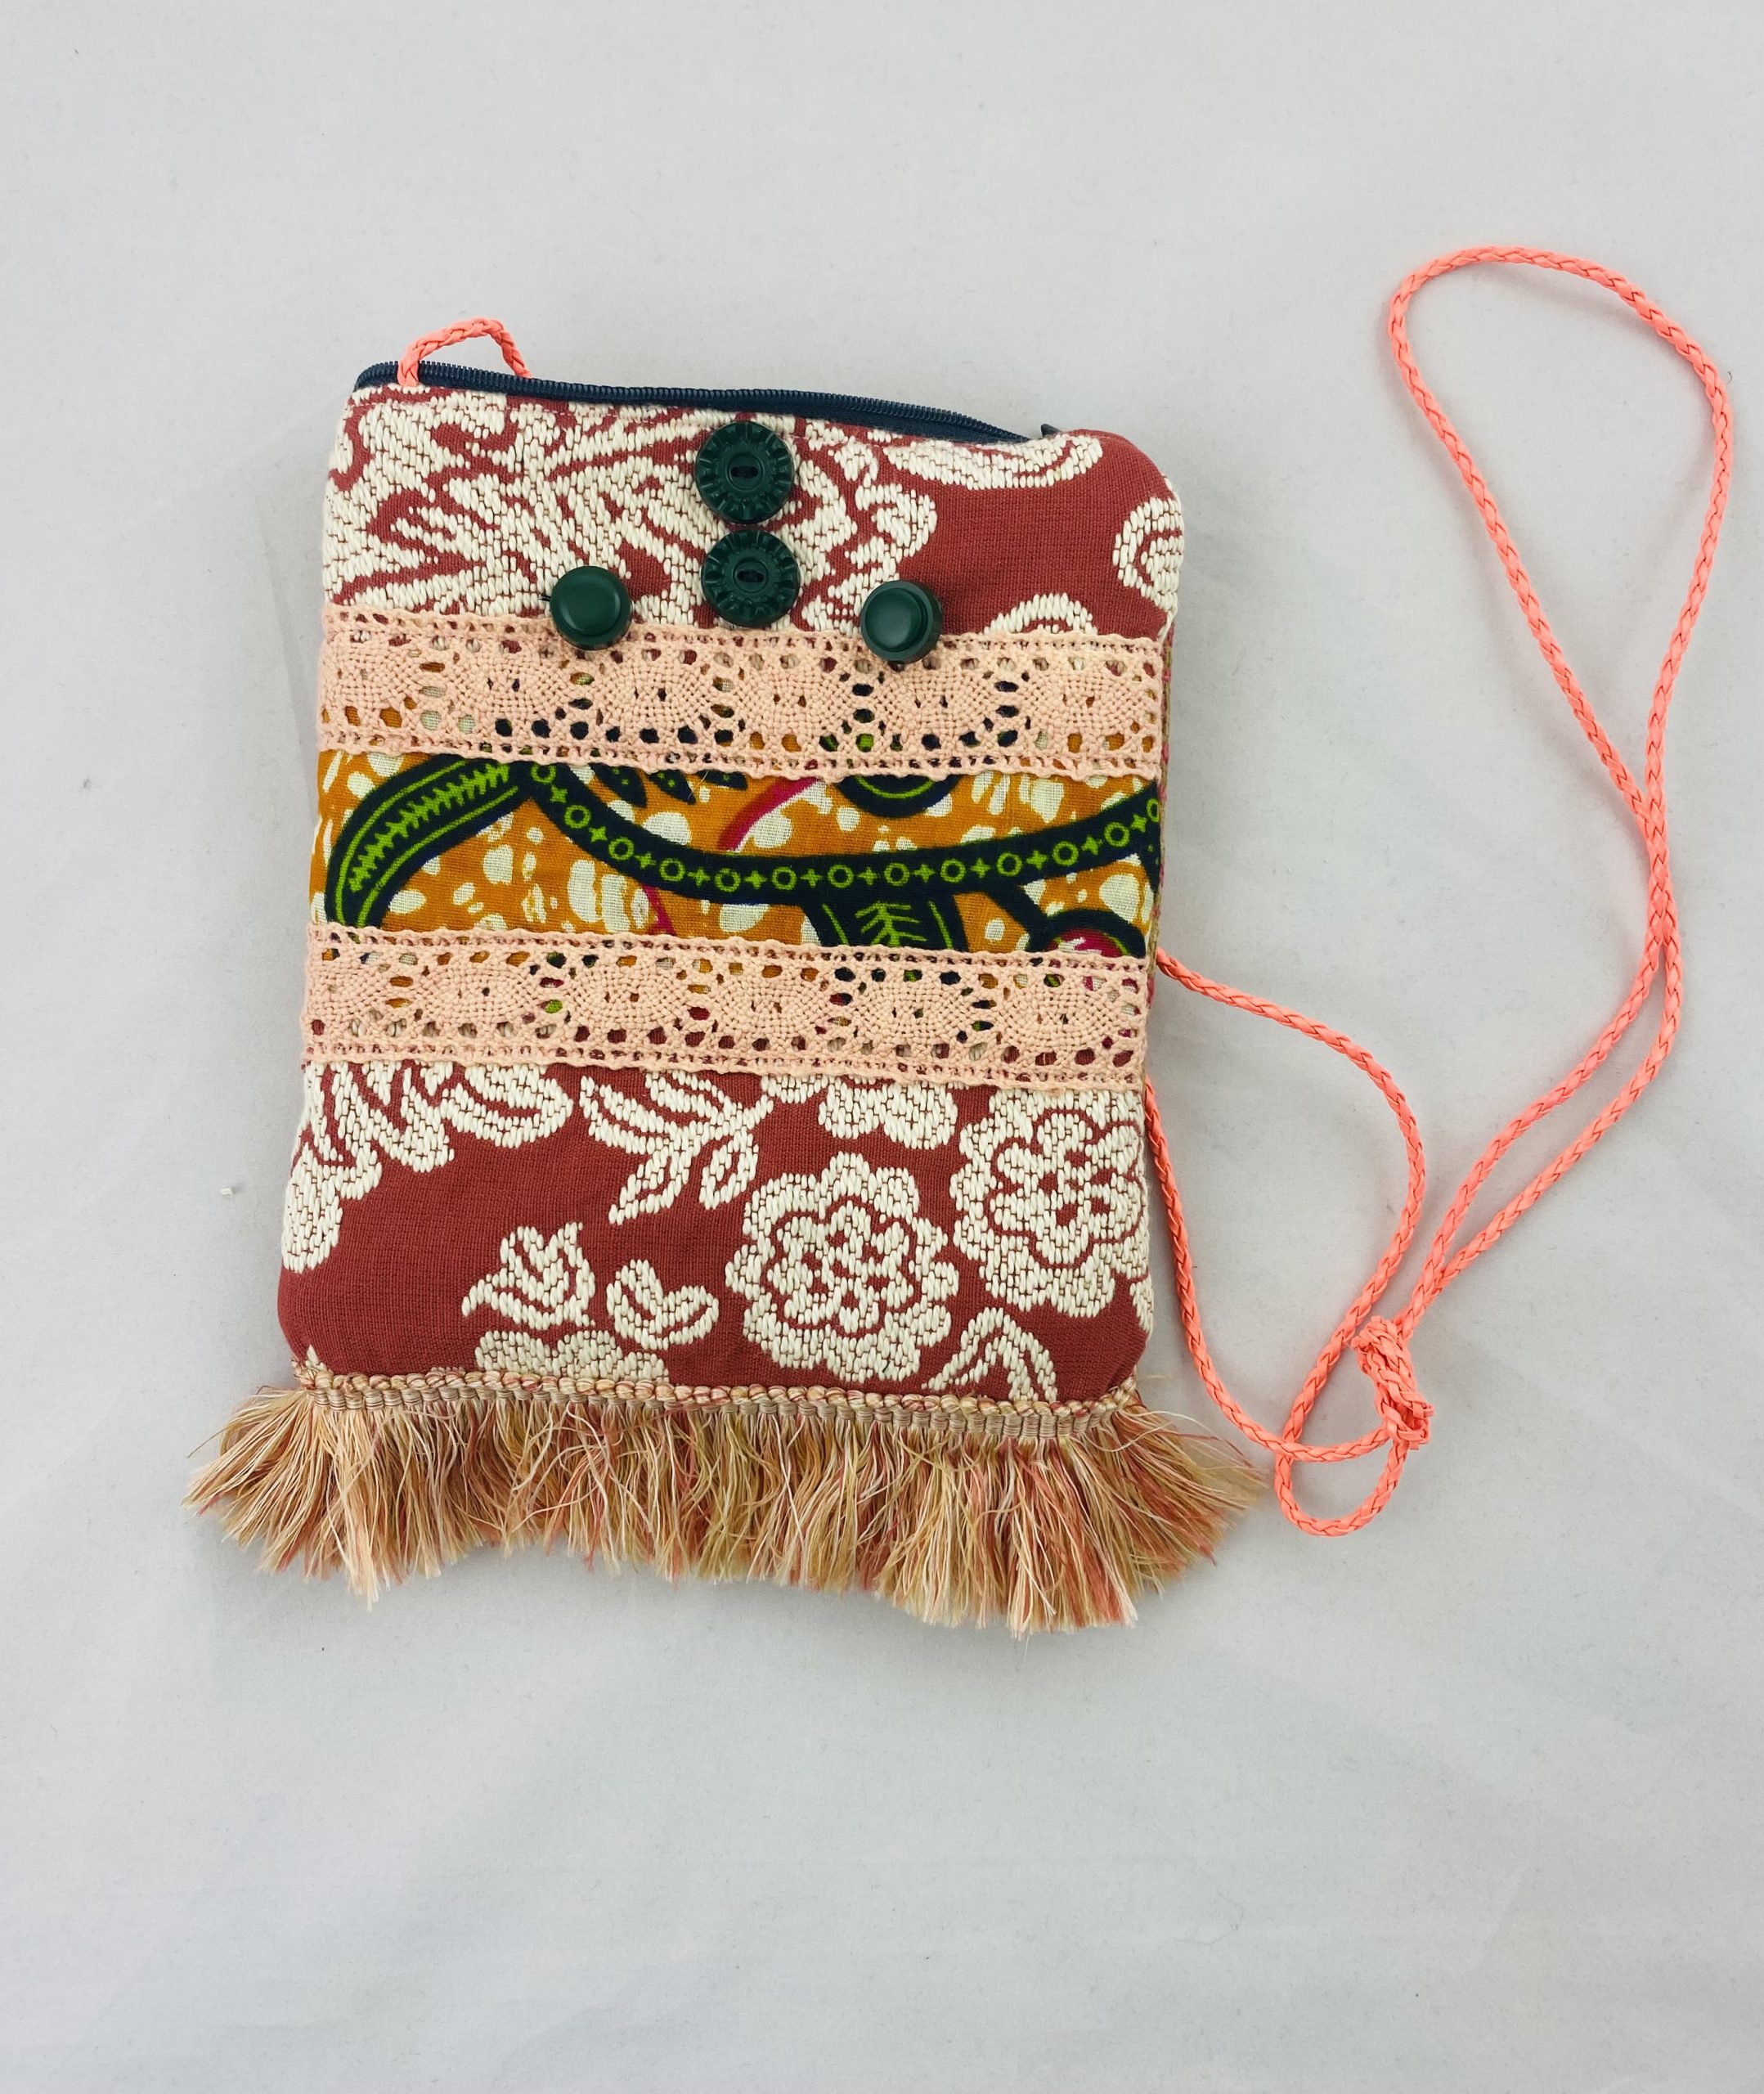 Mini Bag - Catherine - Our Woven Community